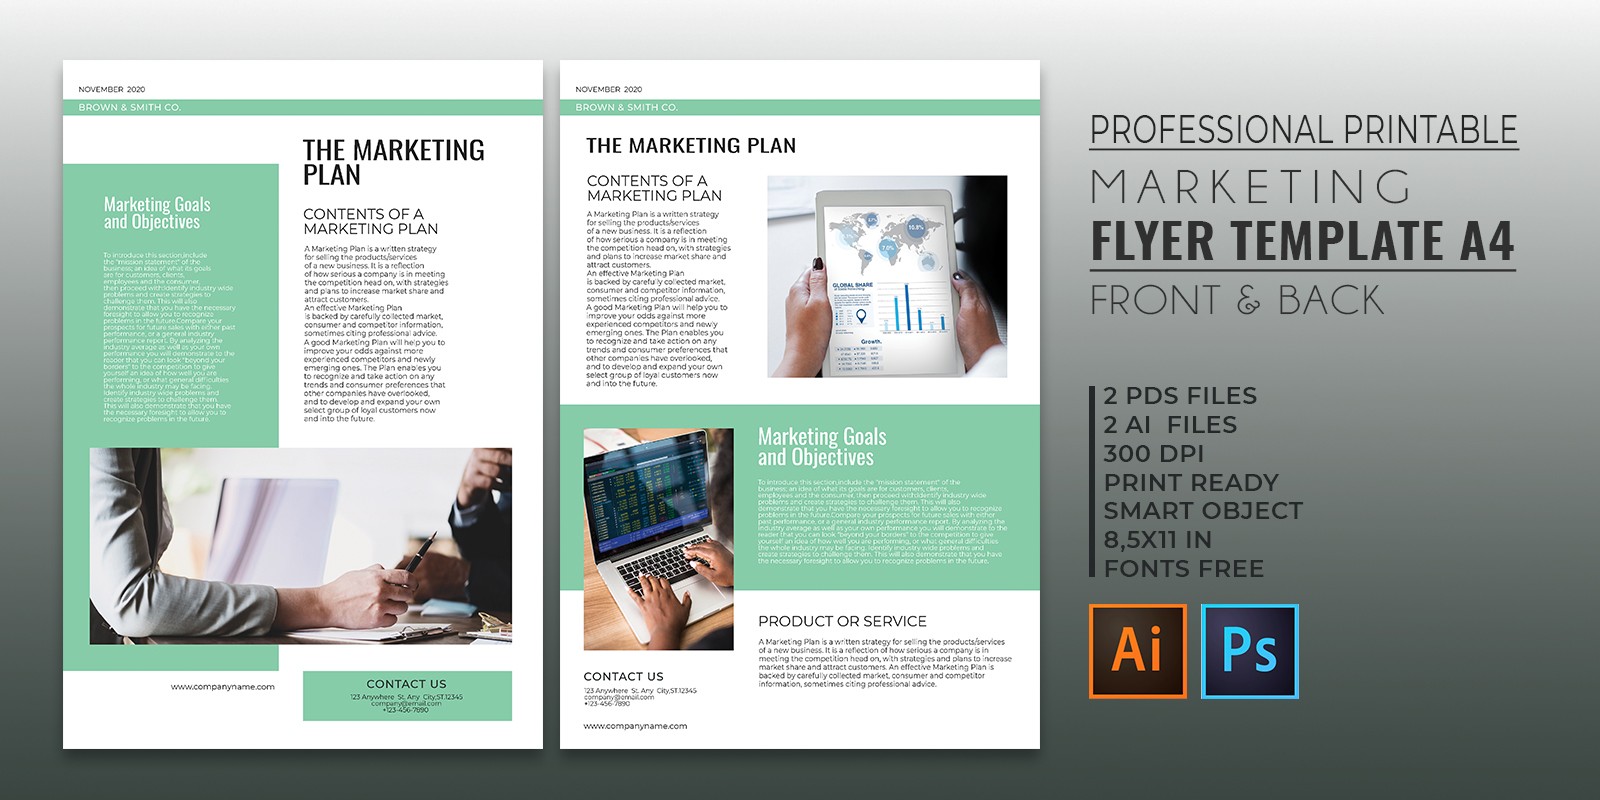 Professional Marketing Flyer Template By Graphicques Codester